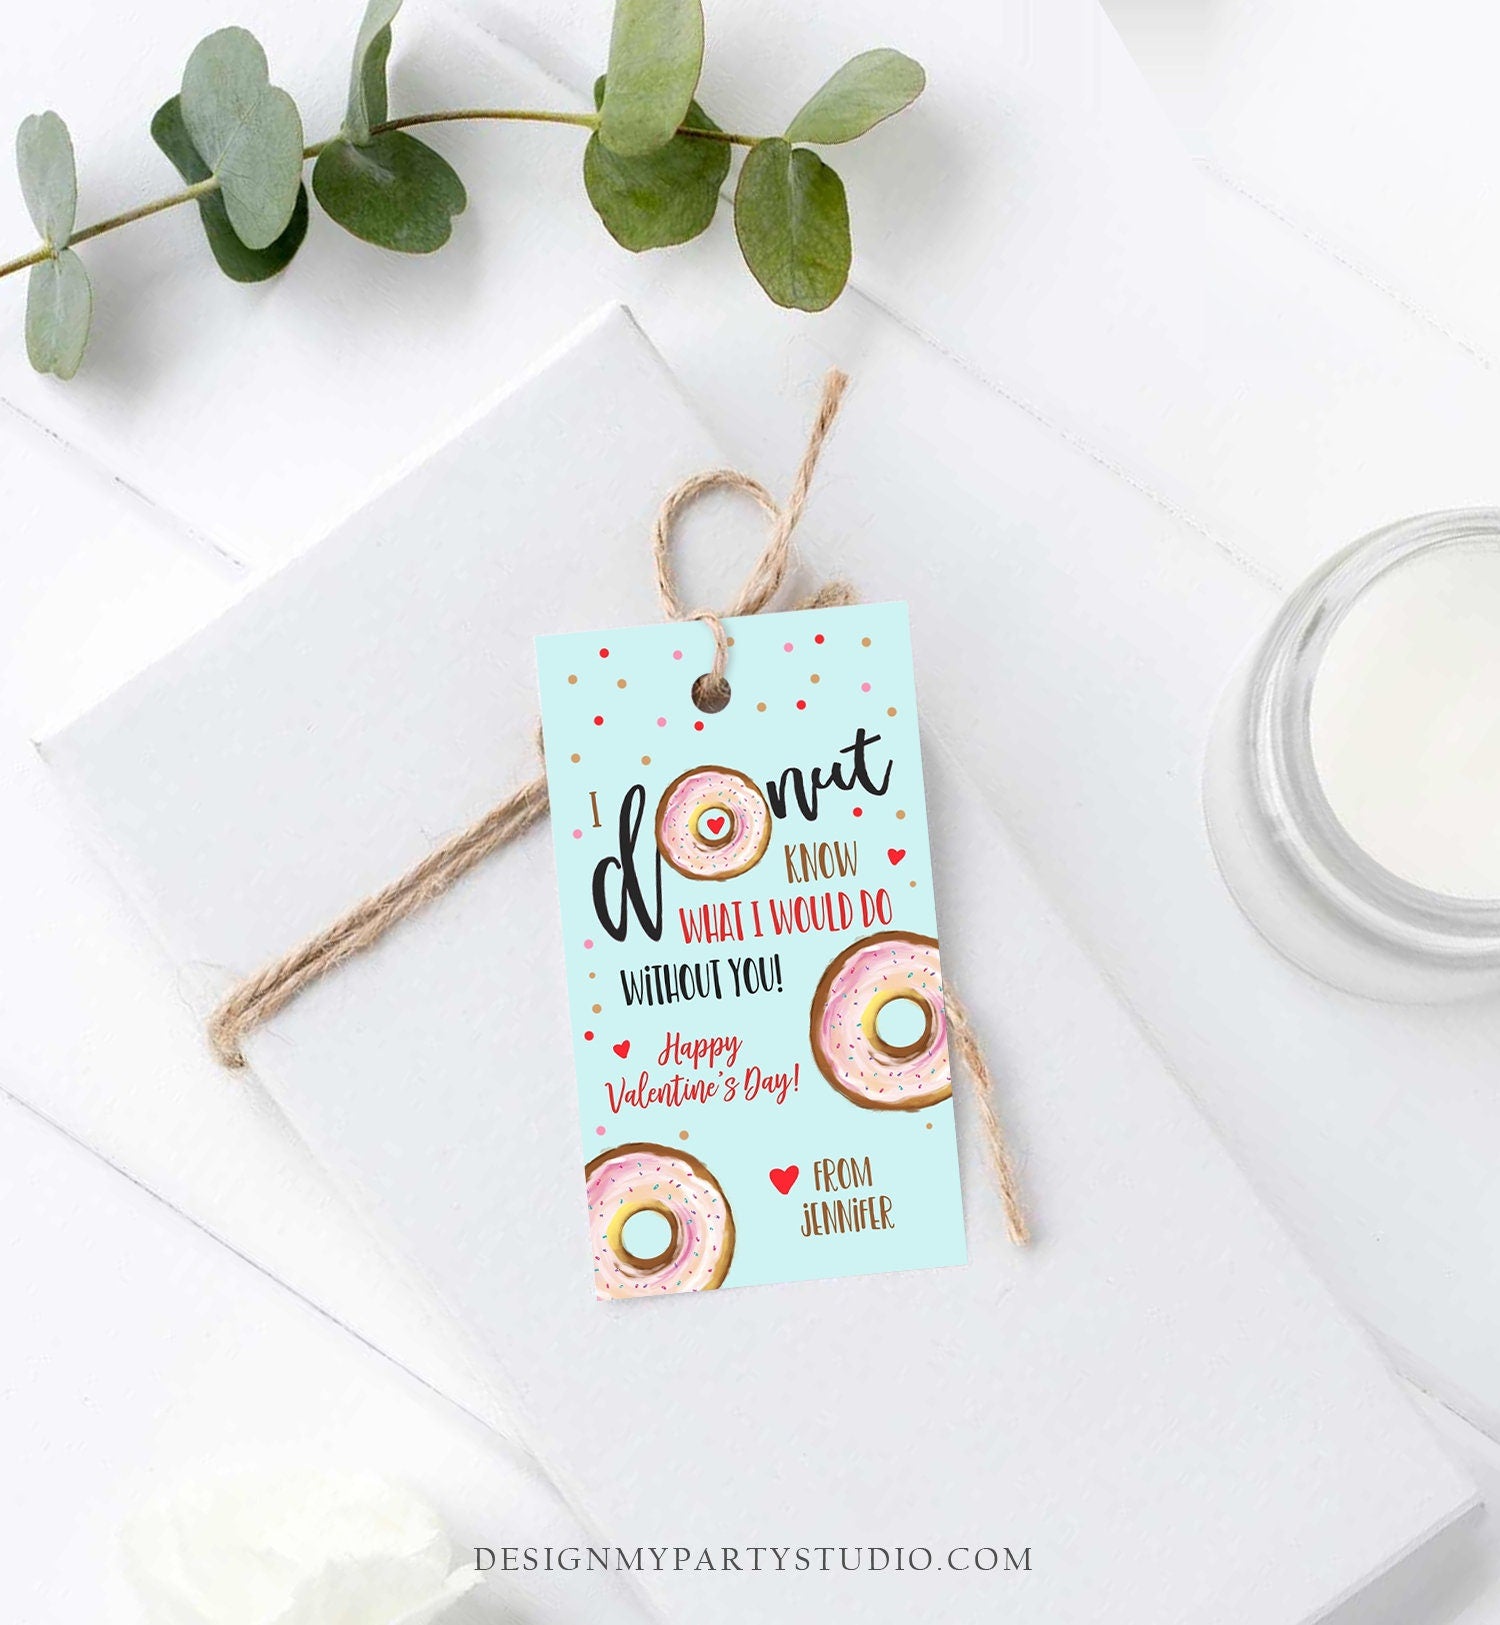 Editable Donut Valentine Tag Valentine's Day Card for Kids School Donut Know Classroom Printable Personalized Digital PRINTABLE 0368 0370